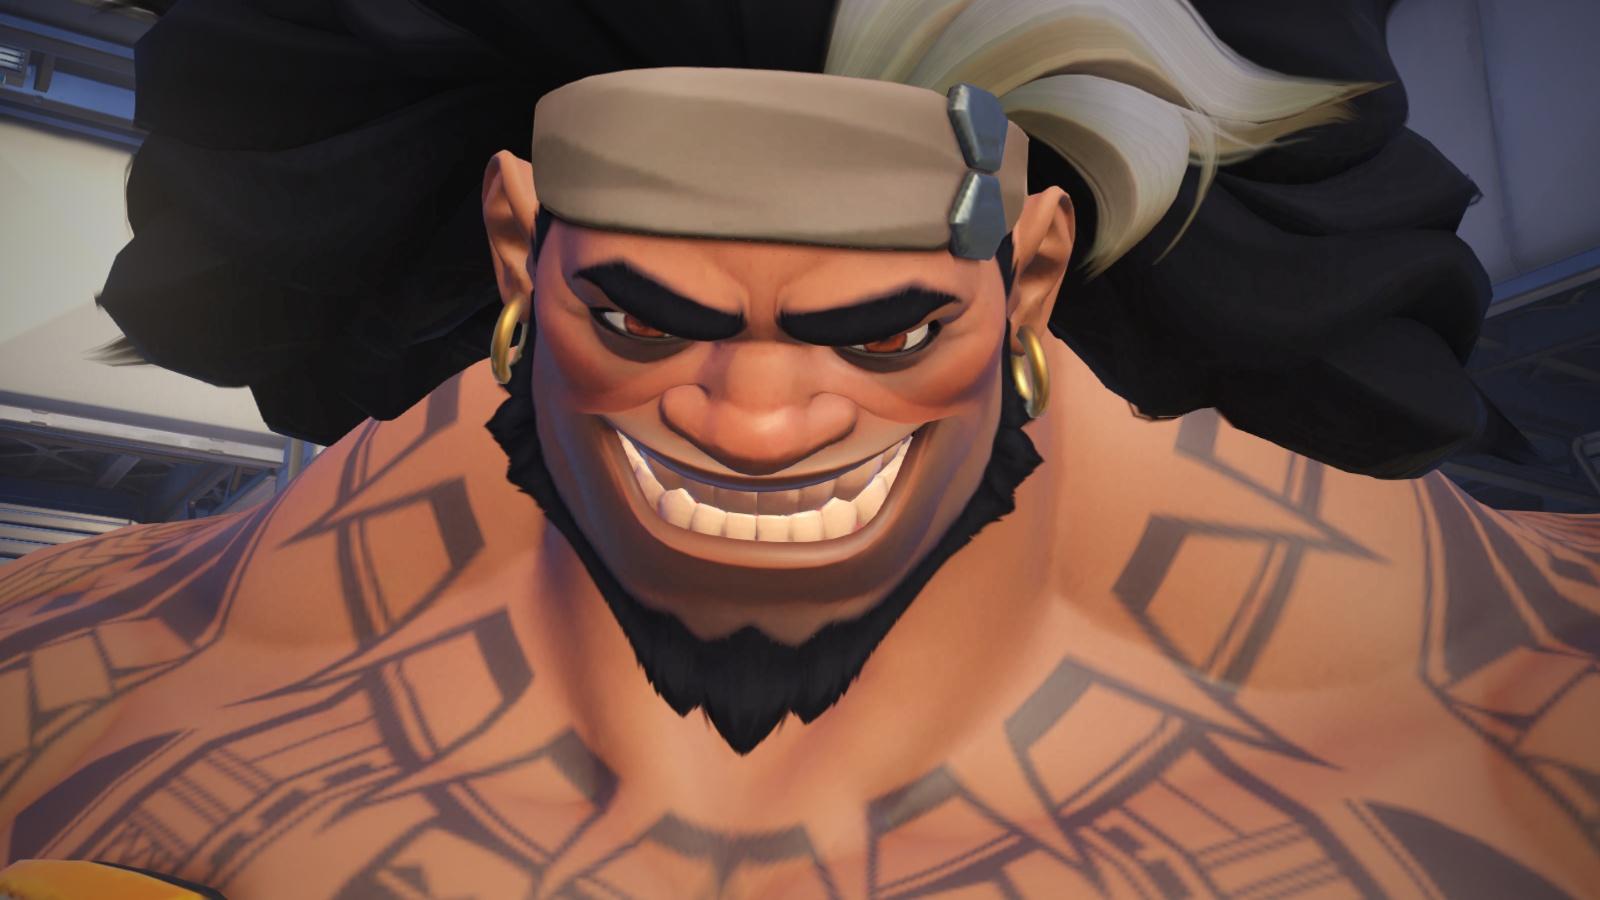 A screenshot of Mauga taken from one of his highlights in Overwatch 2.